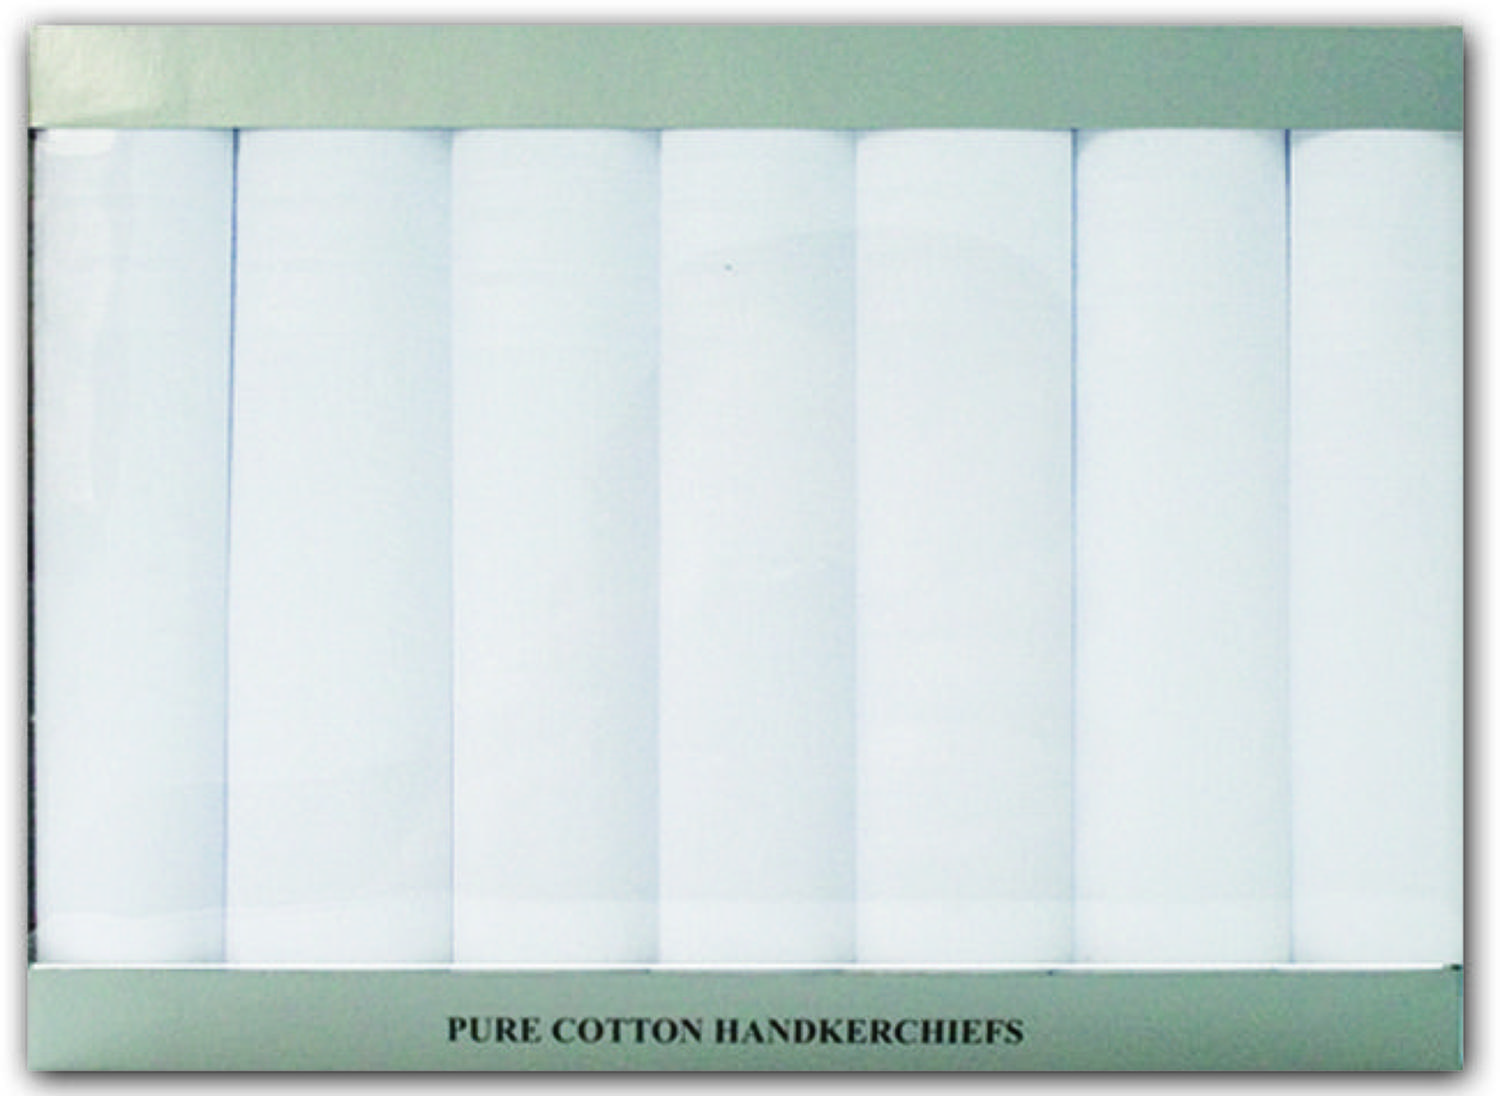 Mens 7 Pack White Cotton Handkerchiefs with a Satin Border